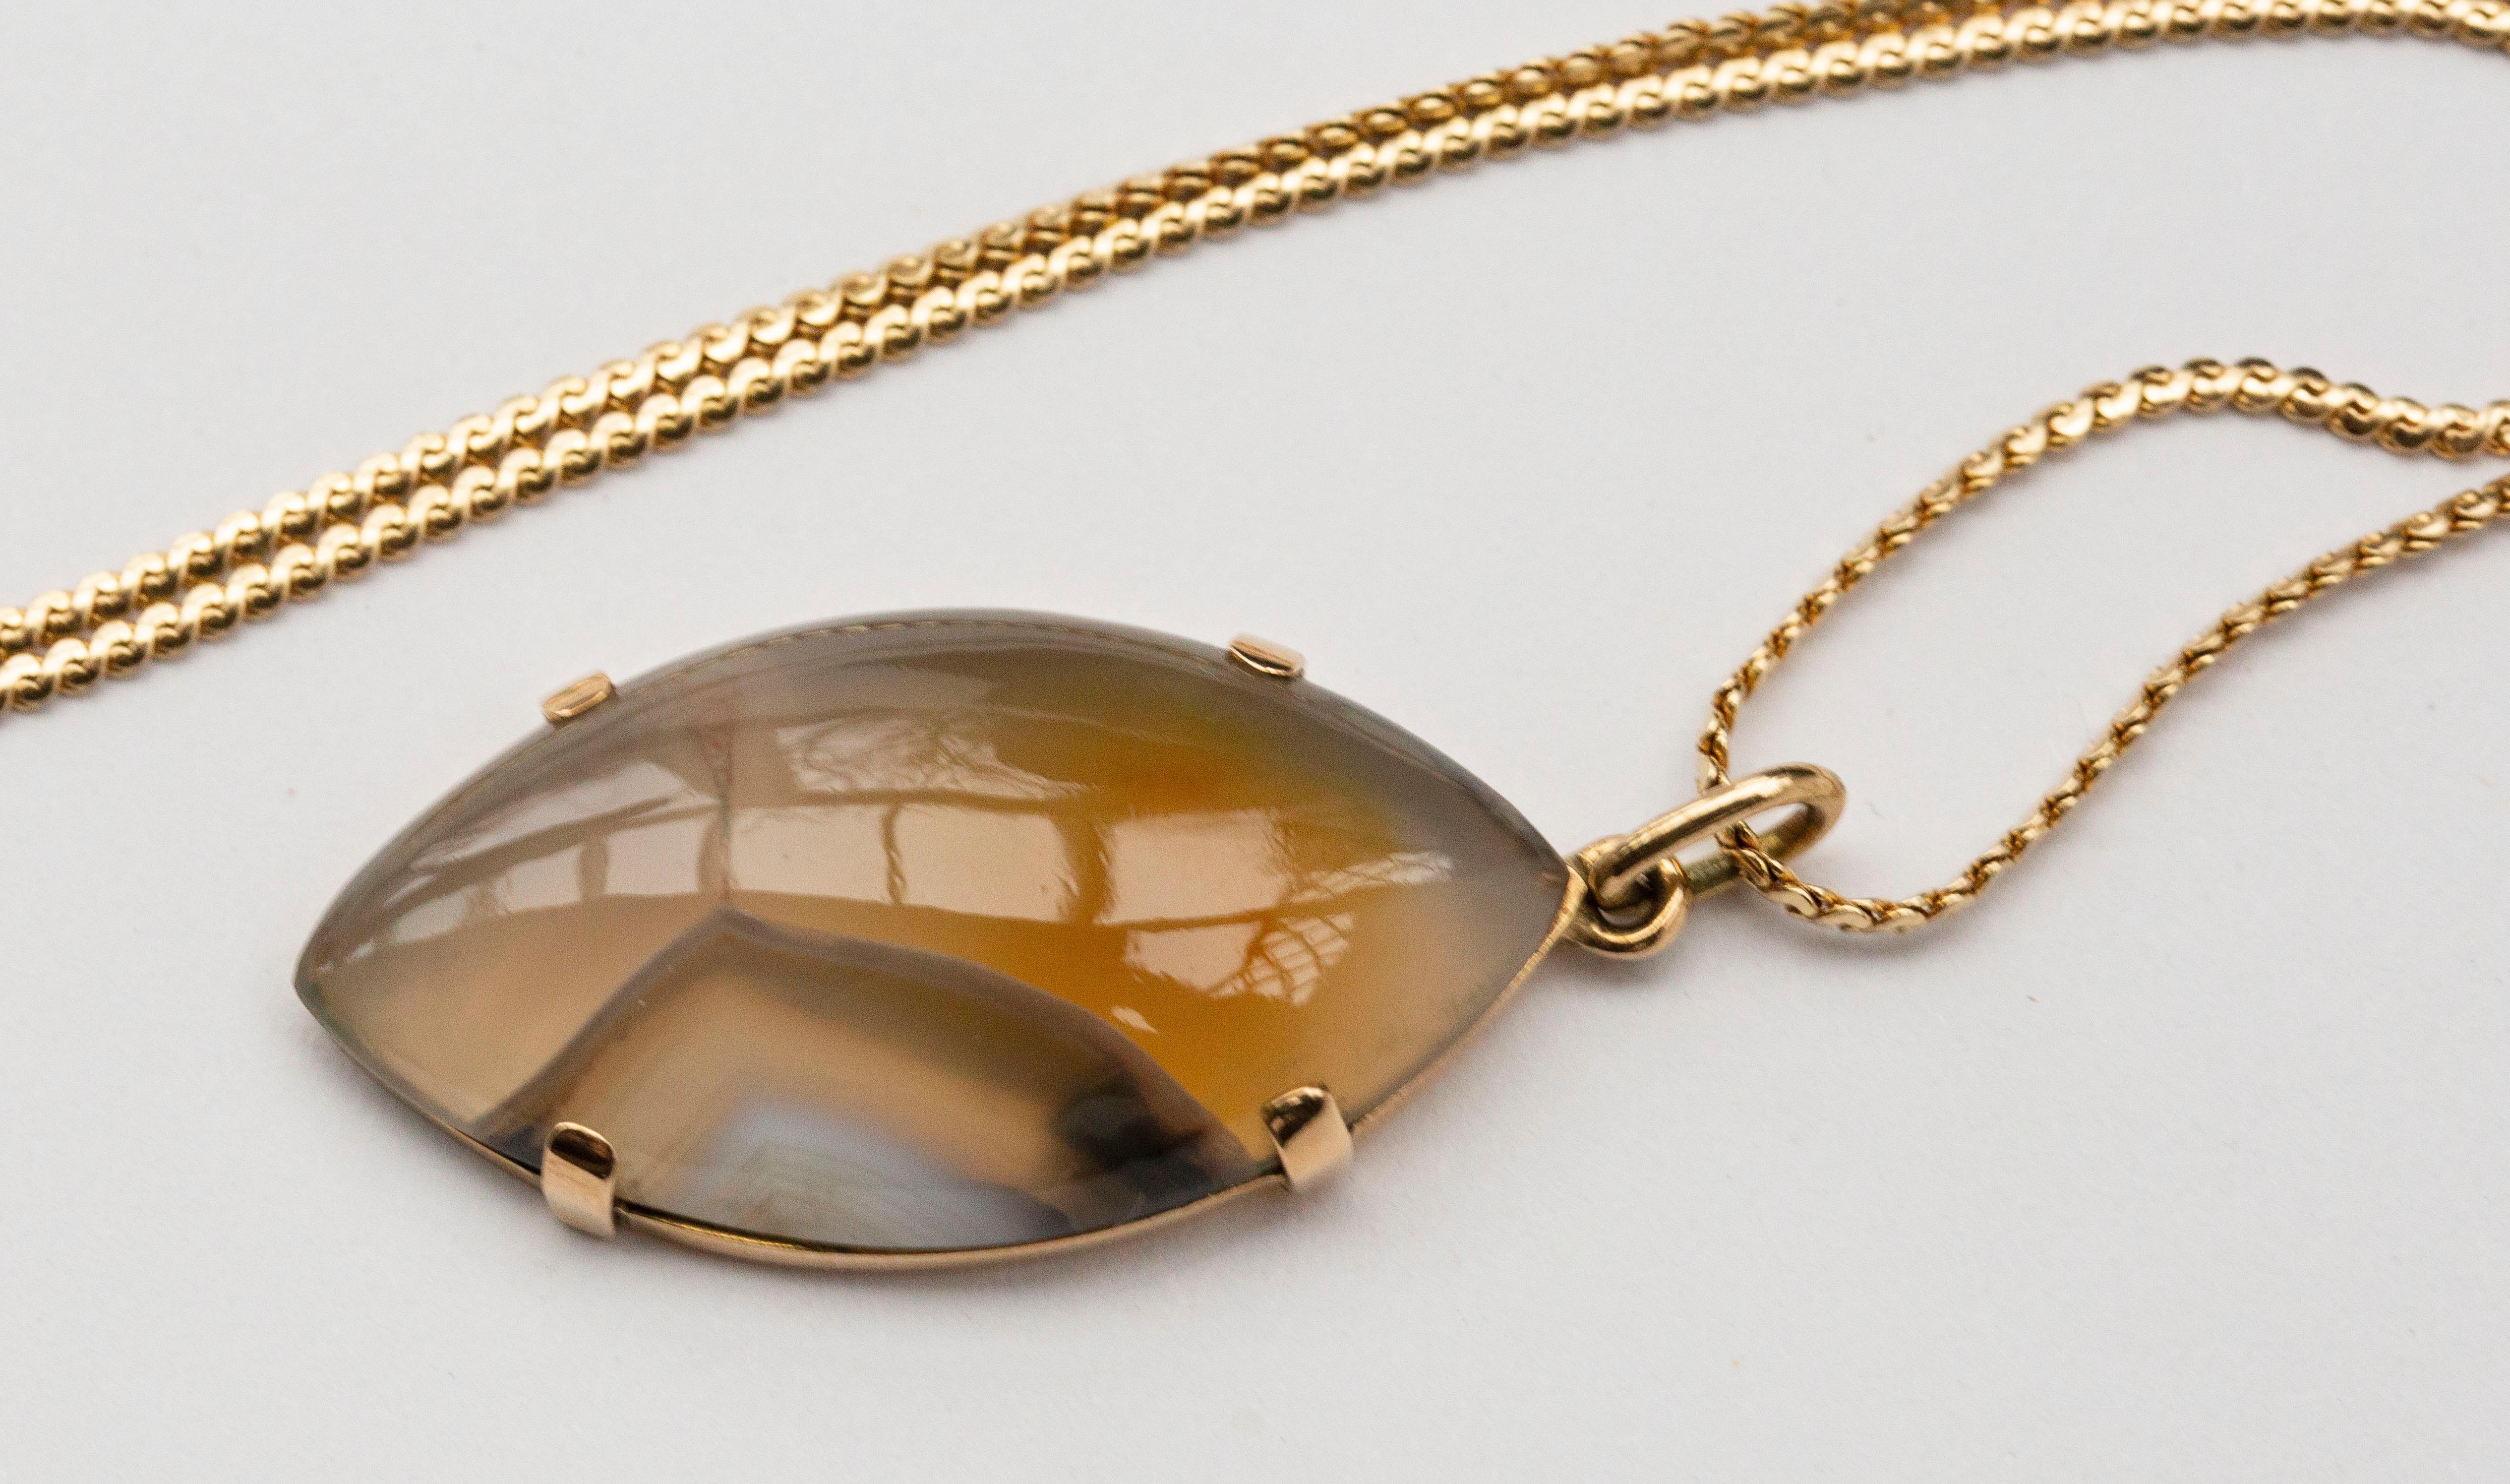 14 Karat Gold Necklace Chain with an Agate Pendant in 14 Karat Gold Setting For Sale 2